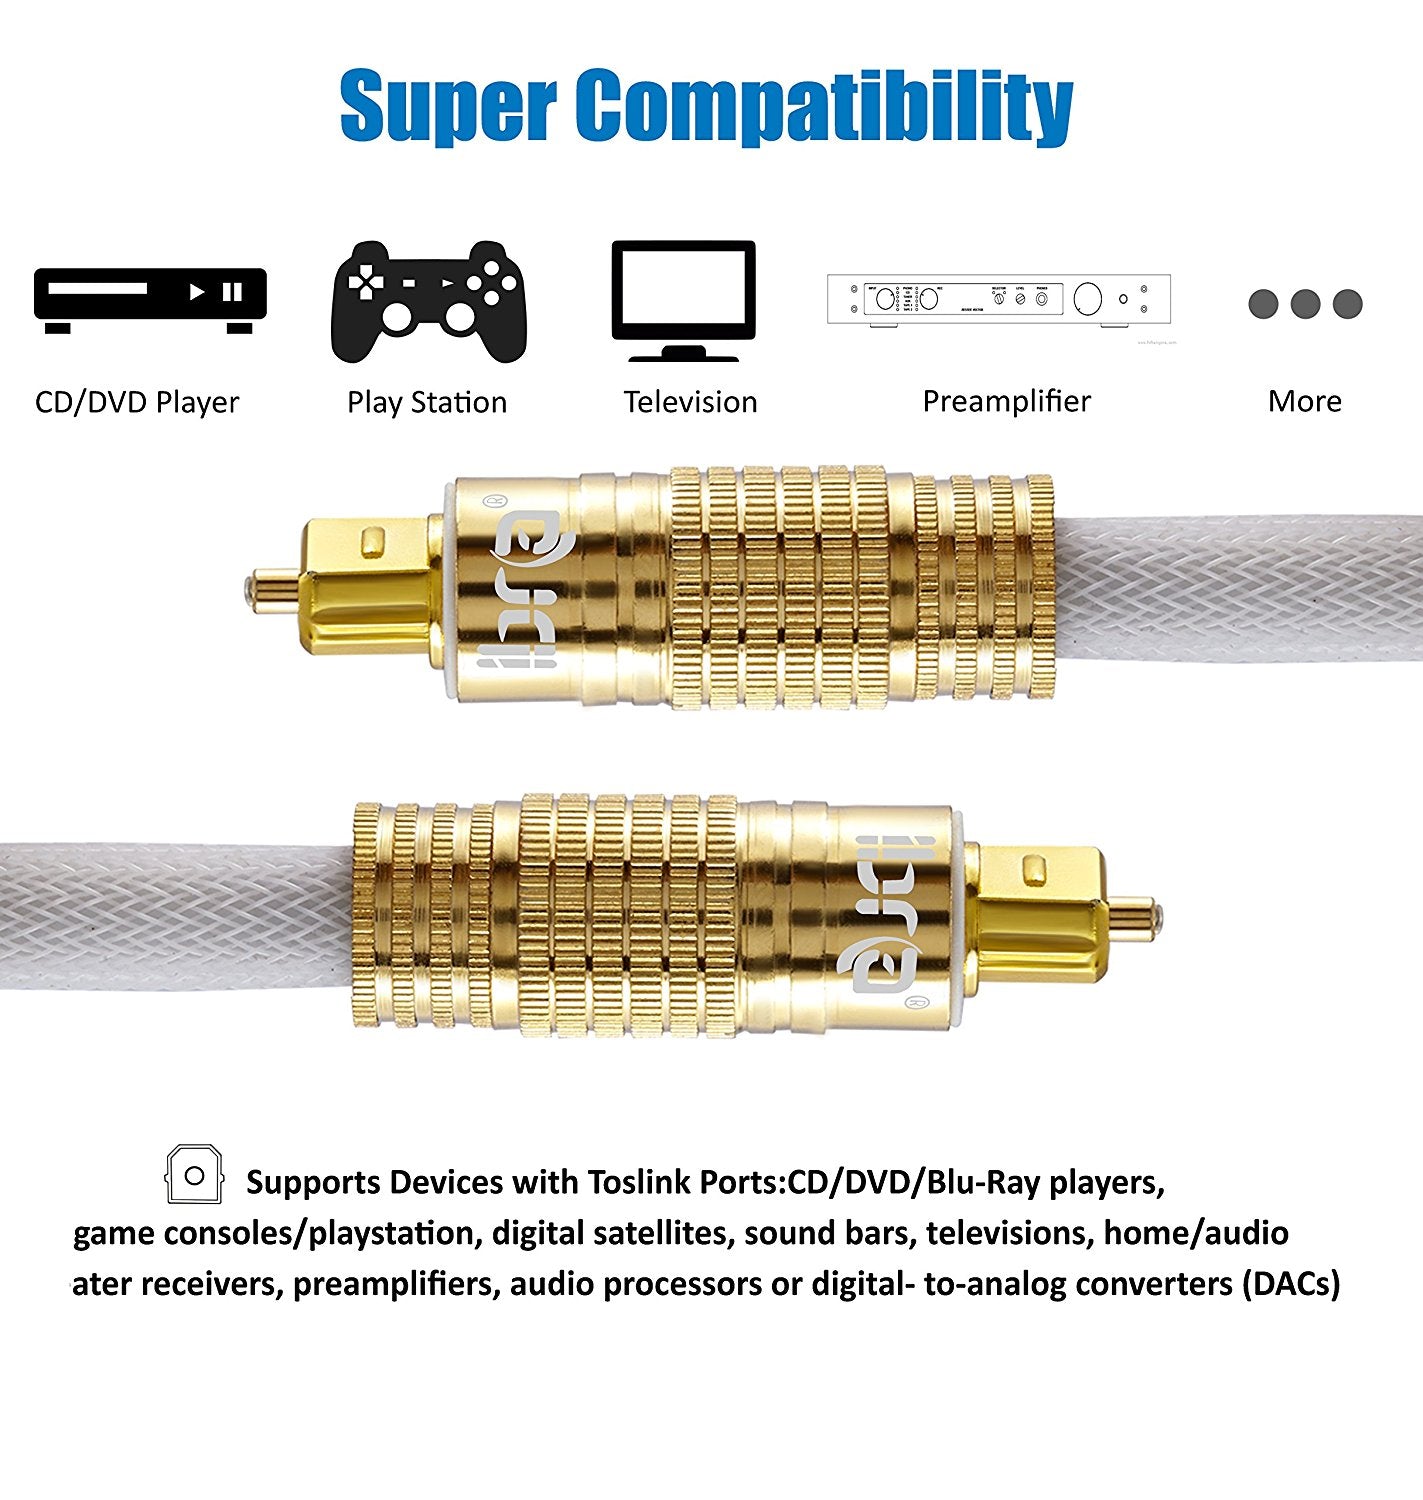 Optical Toslink Digital Audio Cable - 24k Gold Casing - Suitable for PS3,Sky,Sky HD,LCD,LED,Plasma, Blu Ray to Connect with Home Cinema Systems,AV Amps - 3M - IBRA PREMIUM WHITE